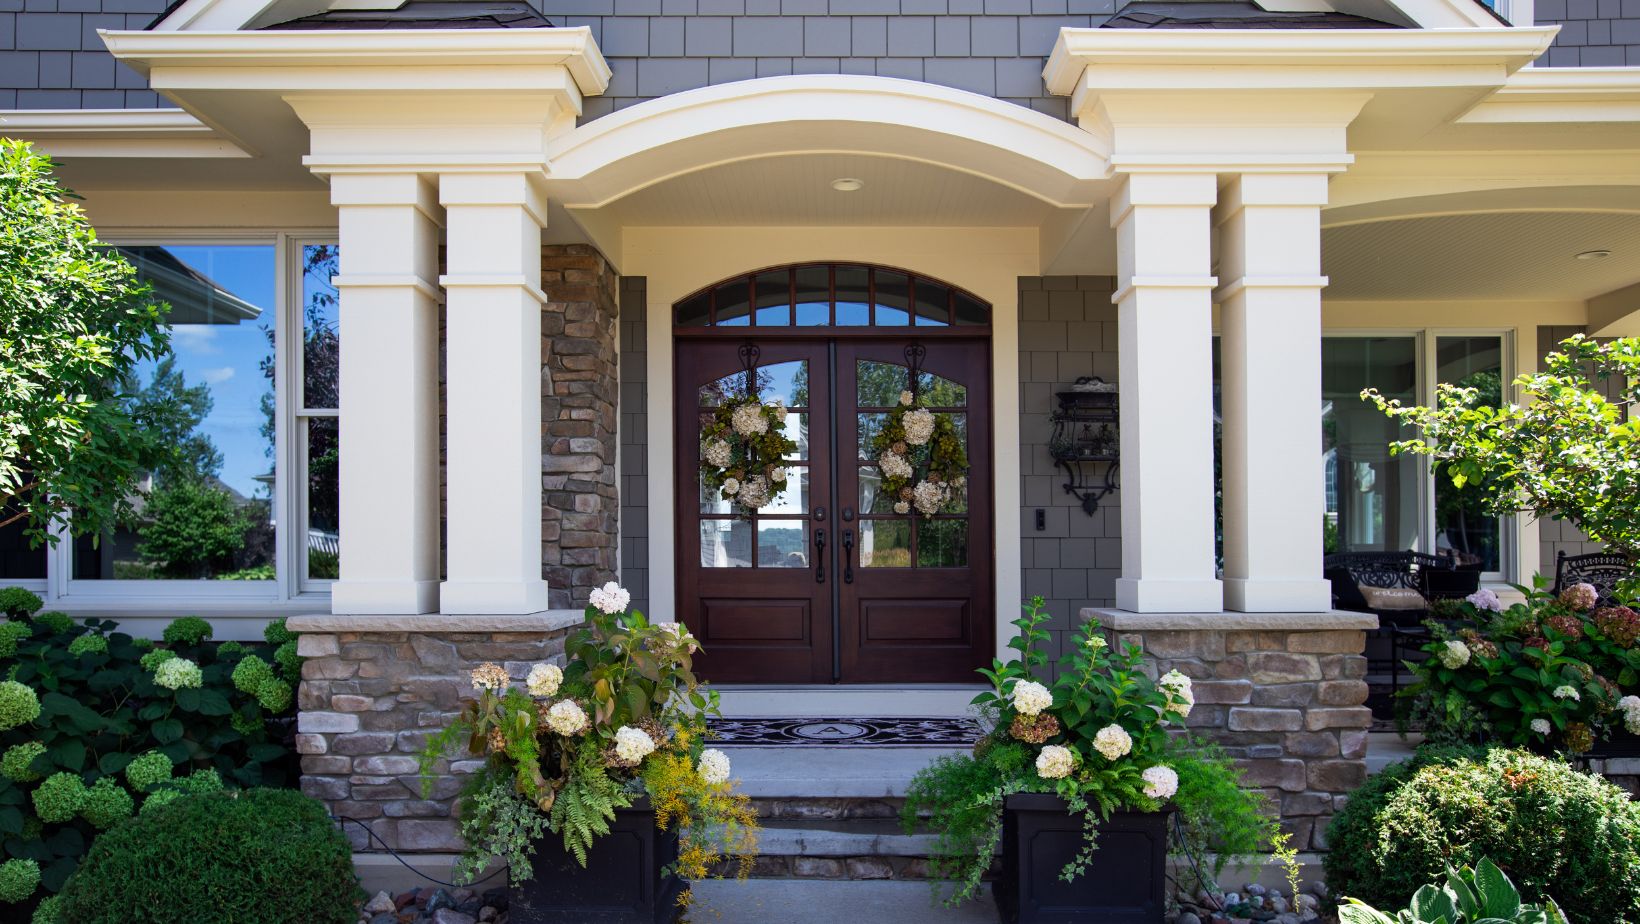 Entry door with custom glass and a transom